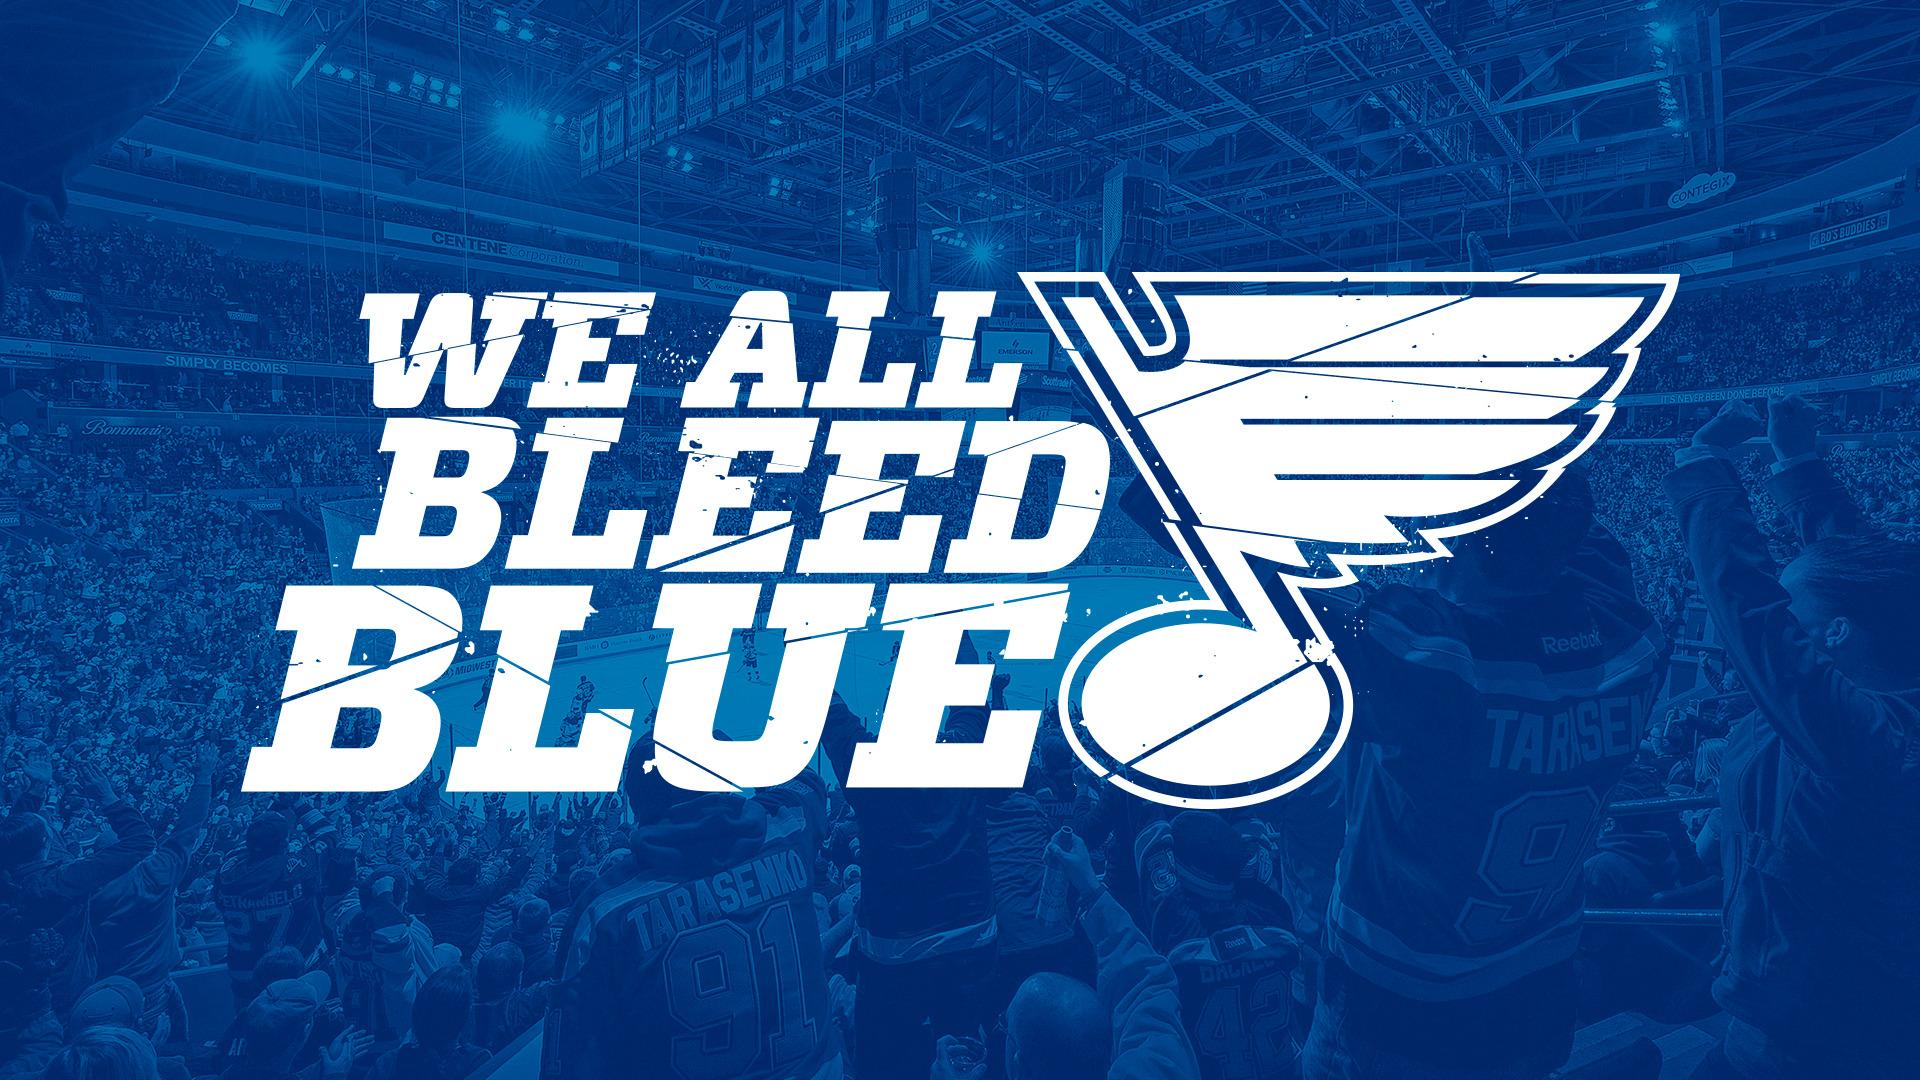 St. Louis Blues 2015-16 Stanley Cup Playoff Wallpapers by Maggie